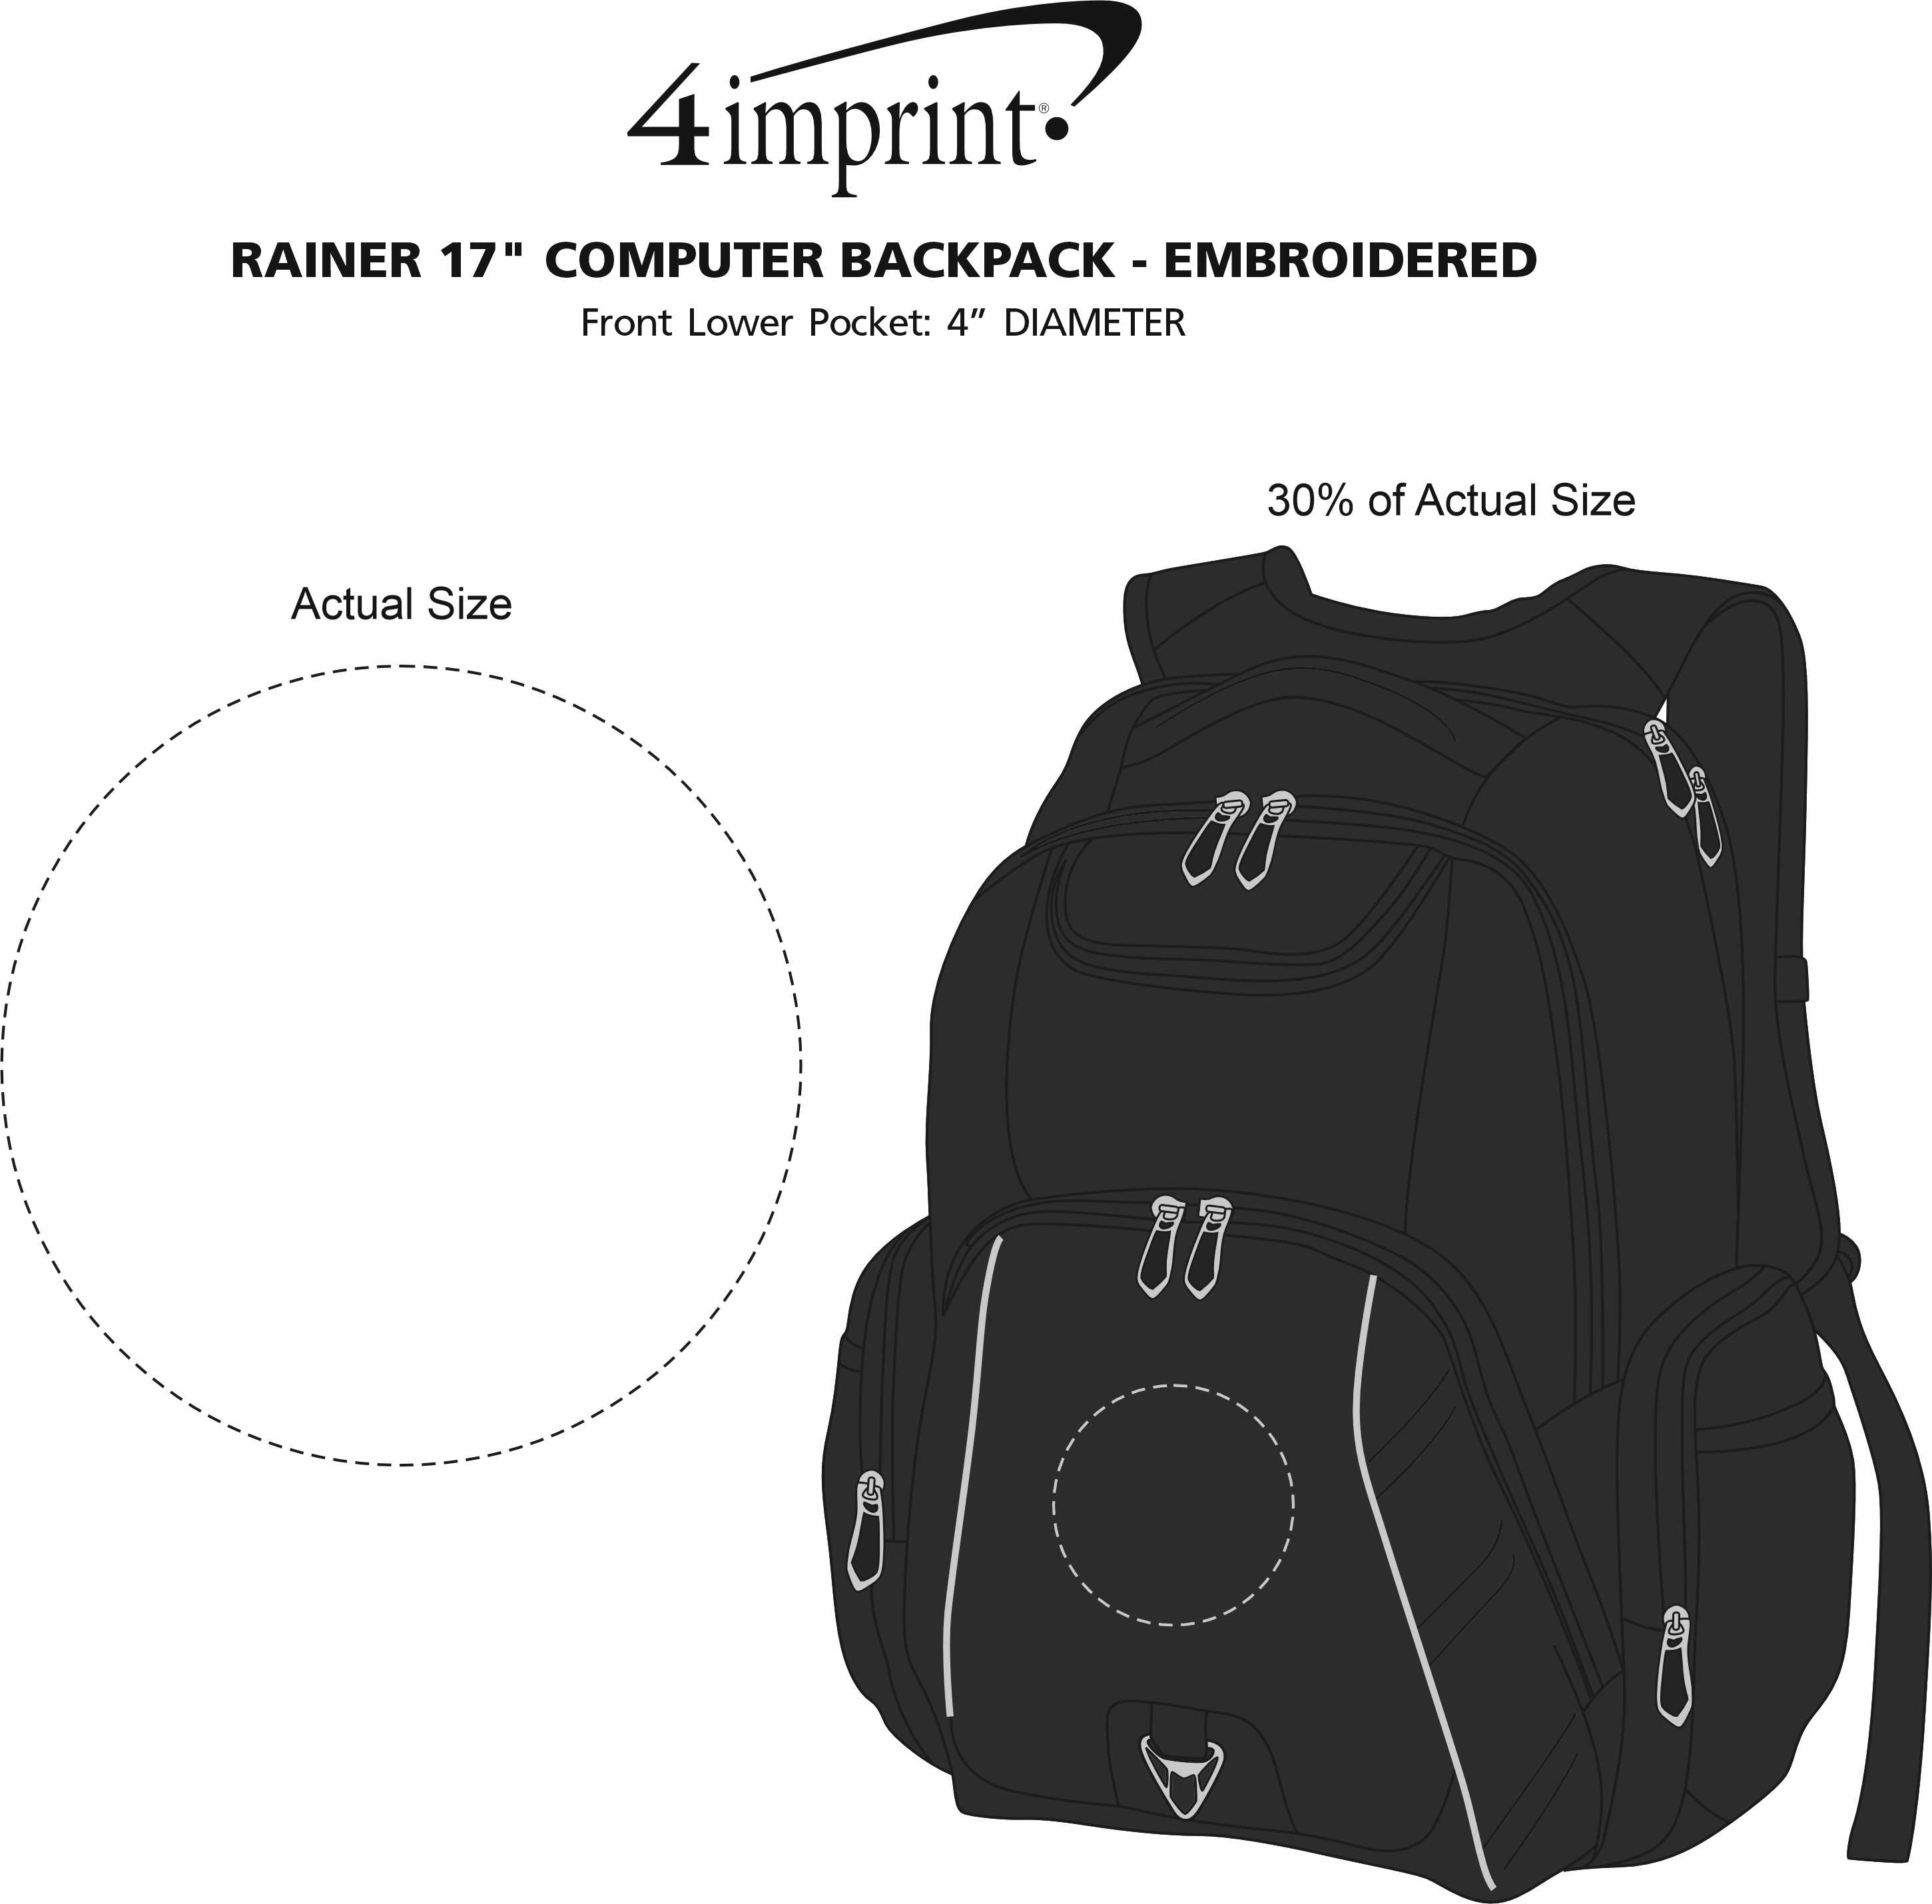 Imprint Area of Rainier 17" Laptop Backpack - Embroidered